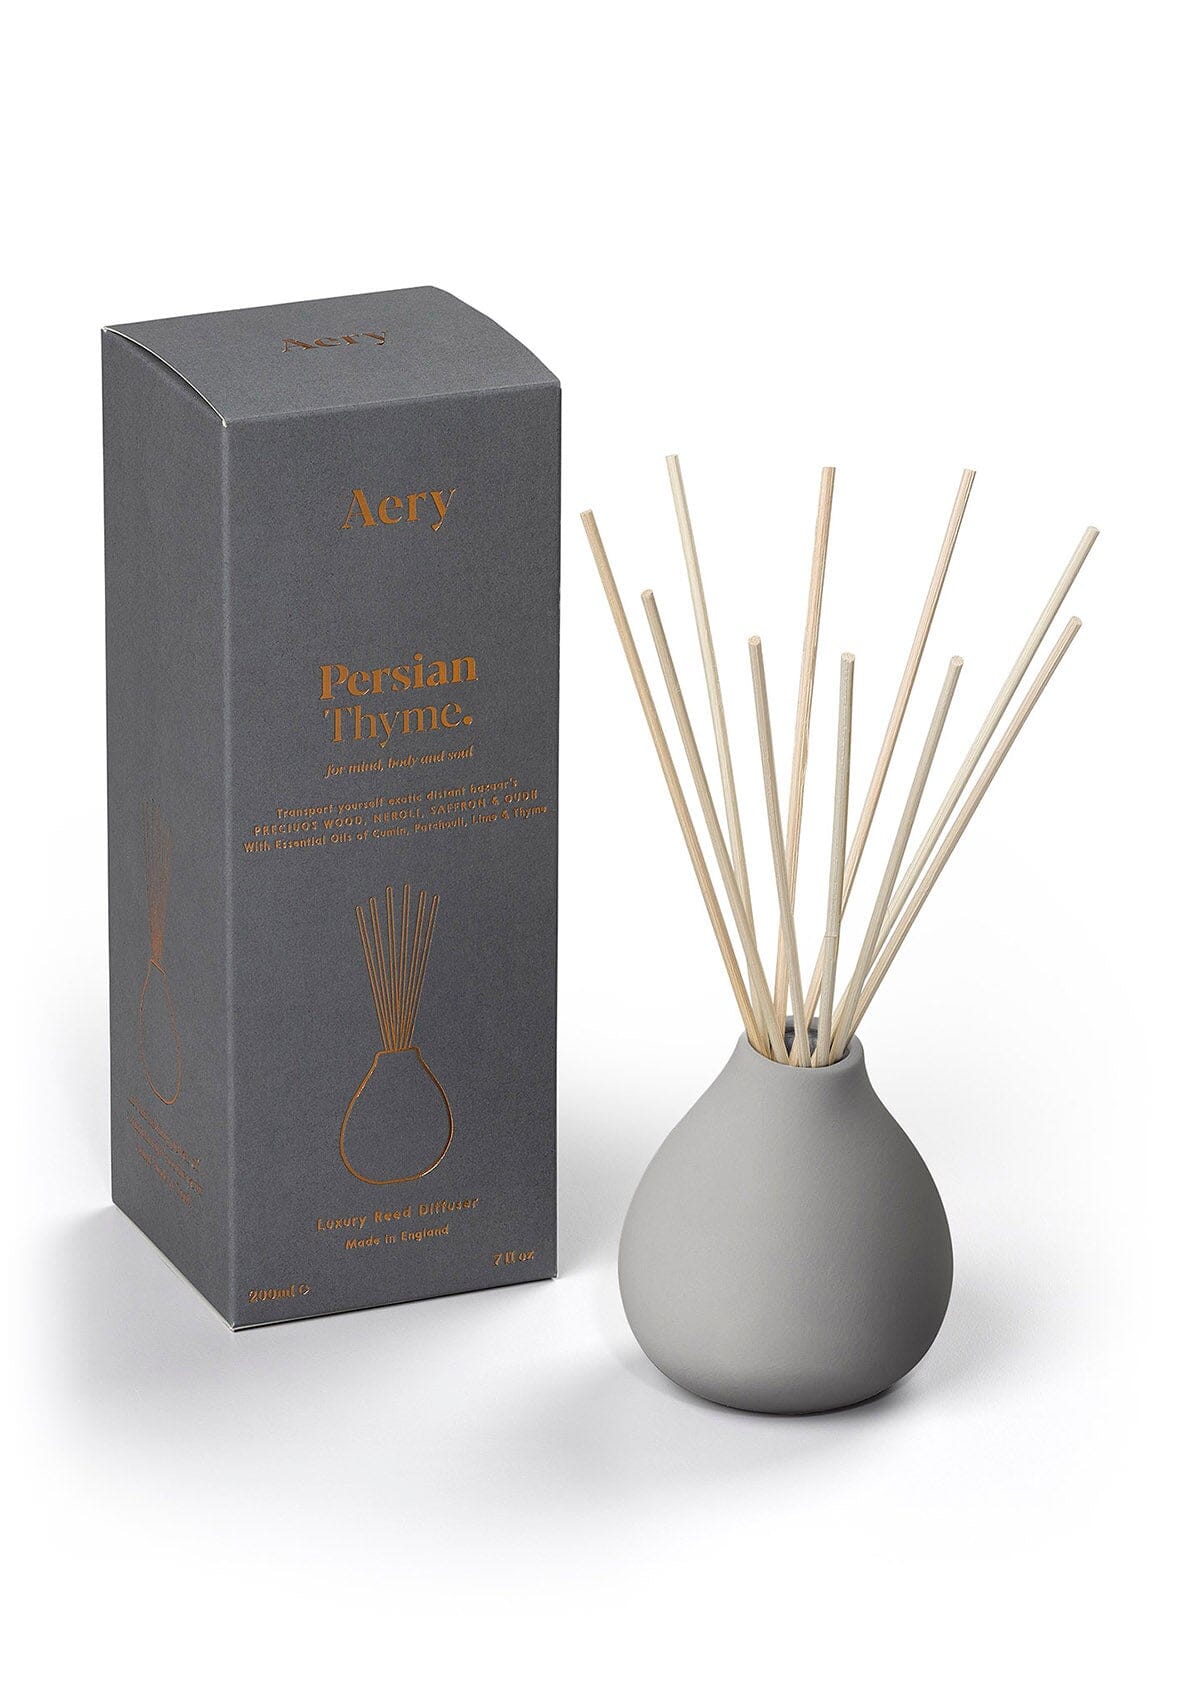 Grey Persian Thyme diffuser with product packaging by Aery 